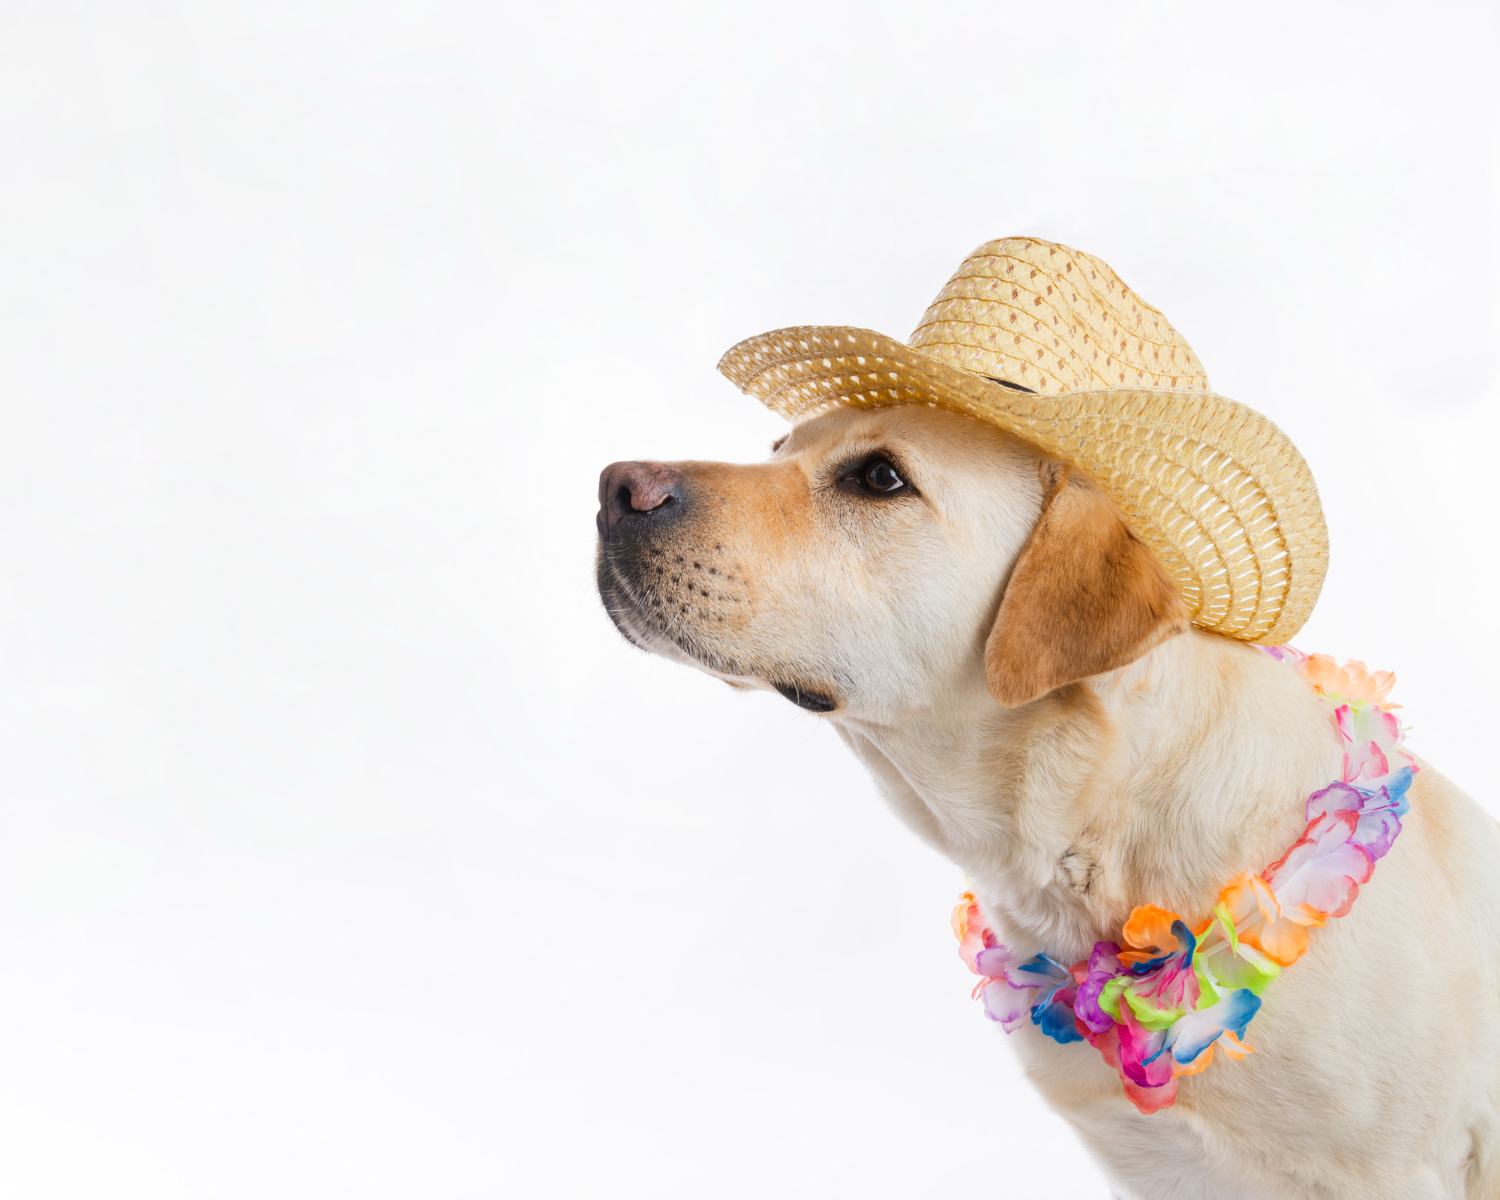 This is the image of a dog wearing a hat.